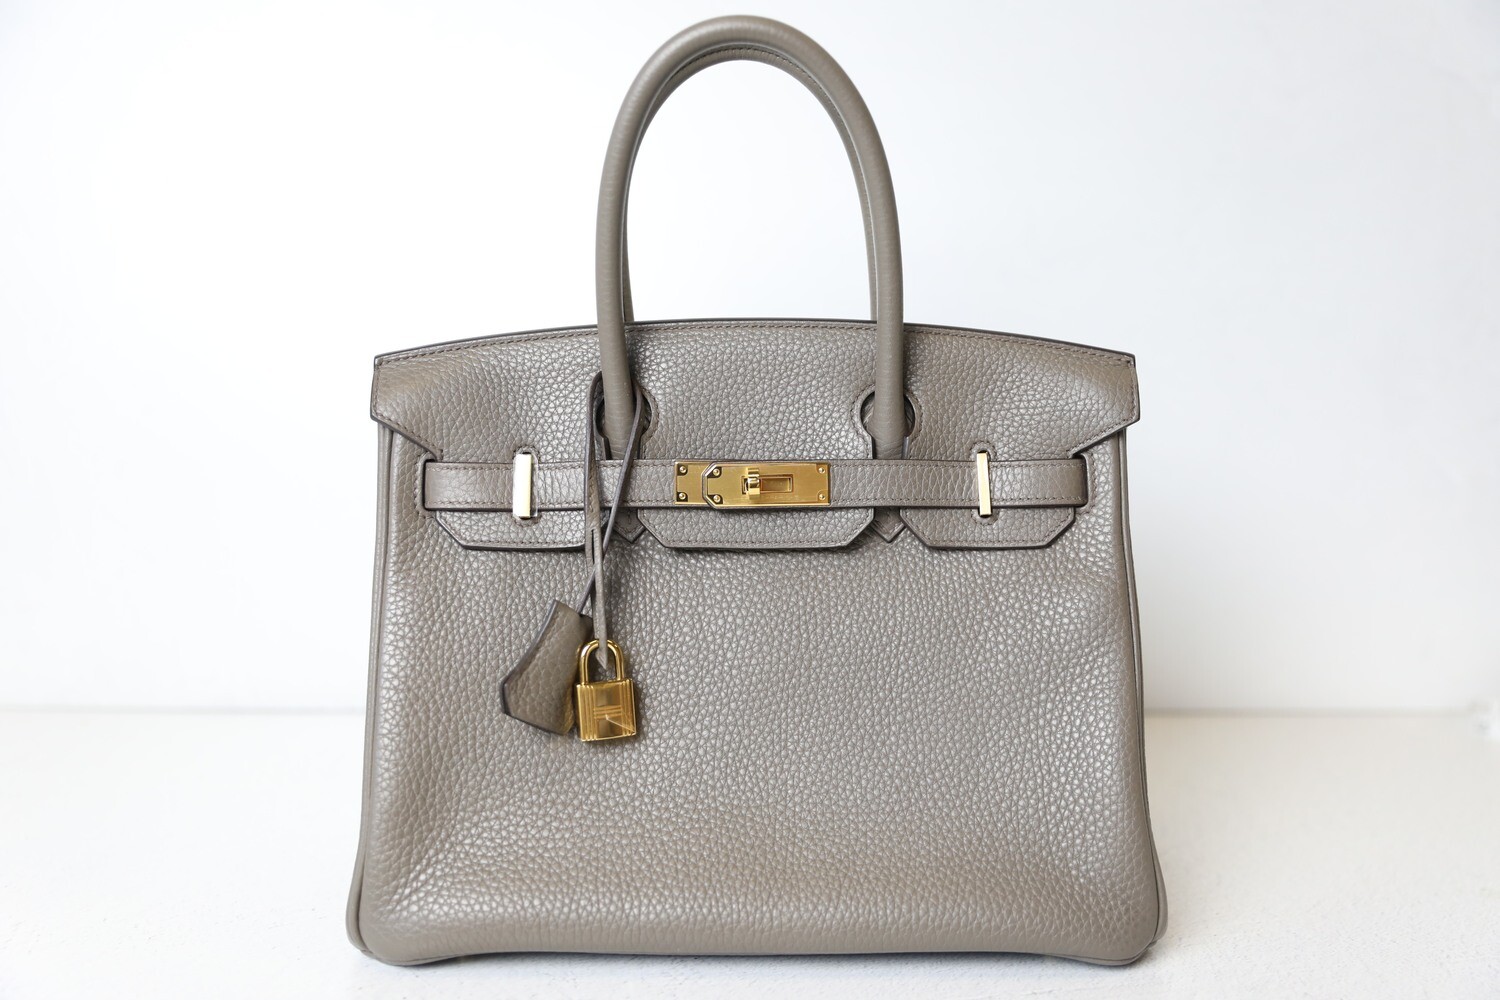 Hermès Gris Etain Birkin 30cm of Clemence Leather with Gold Hardware, Handbags and Accessories Online, Ecommerce Retail